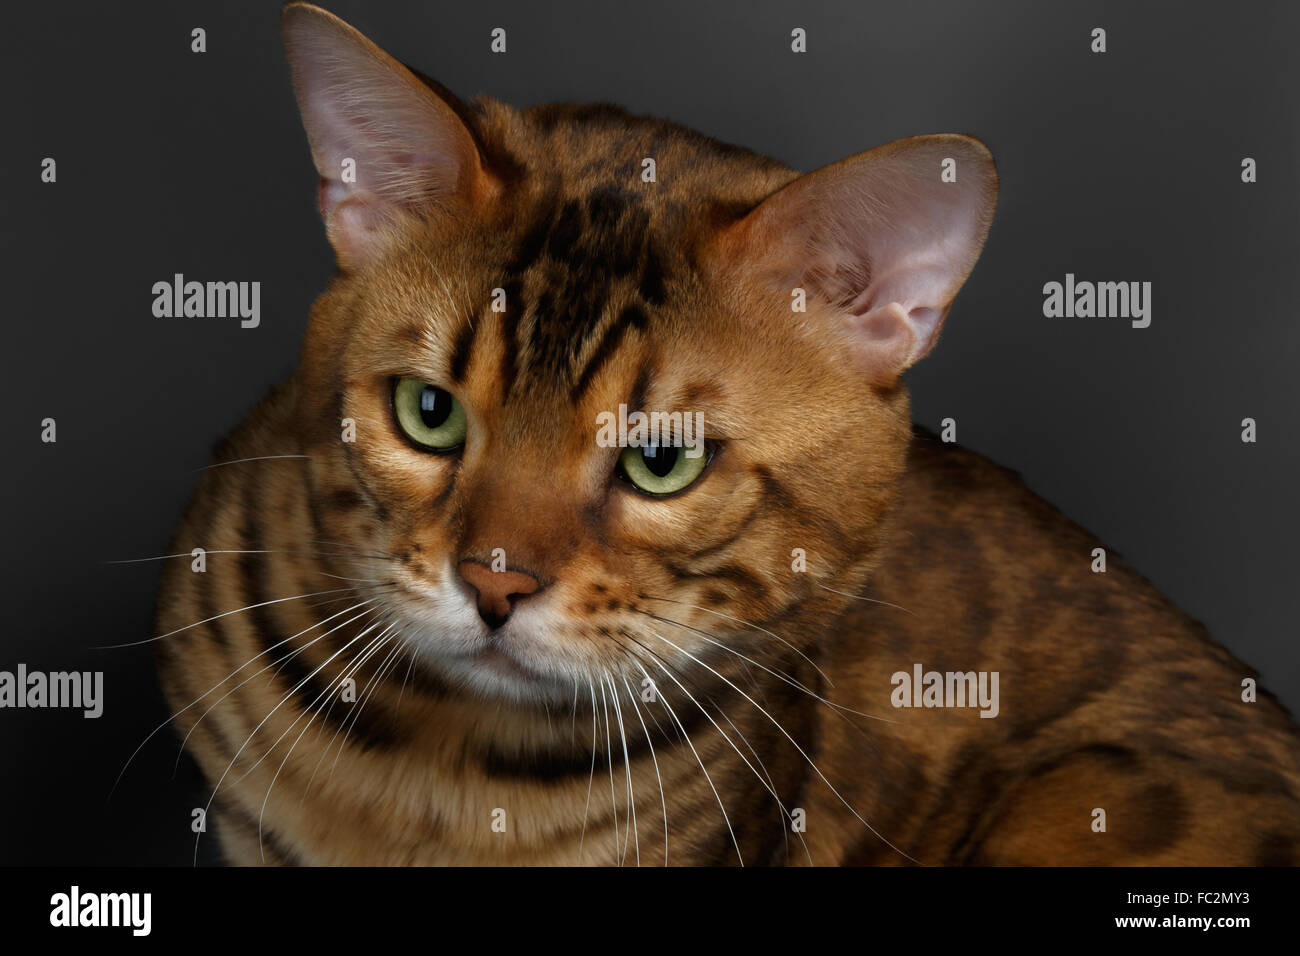 69,135 Angry Cat Face Images, Stock Photos, 3D objects, & Vectors